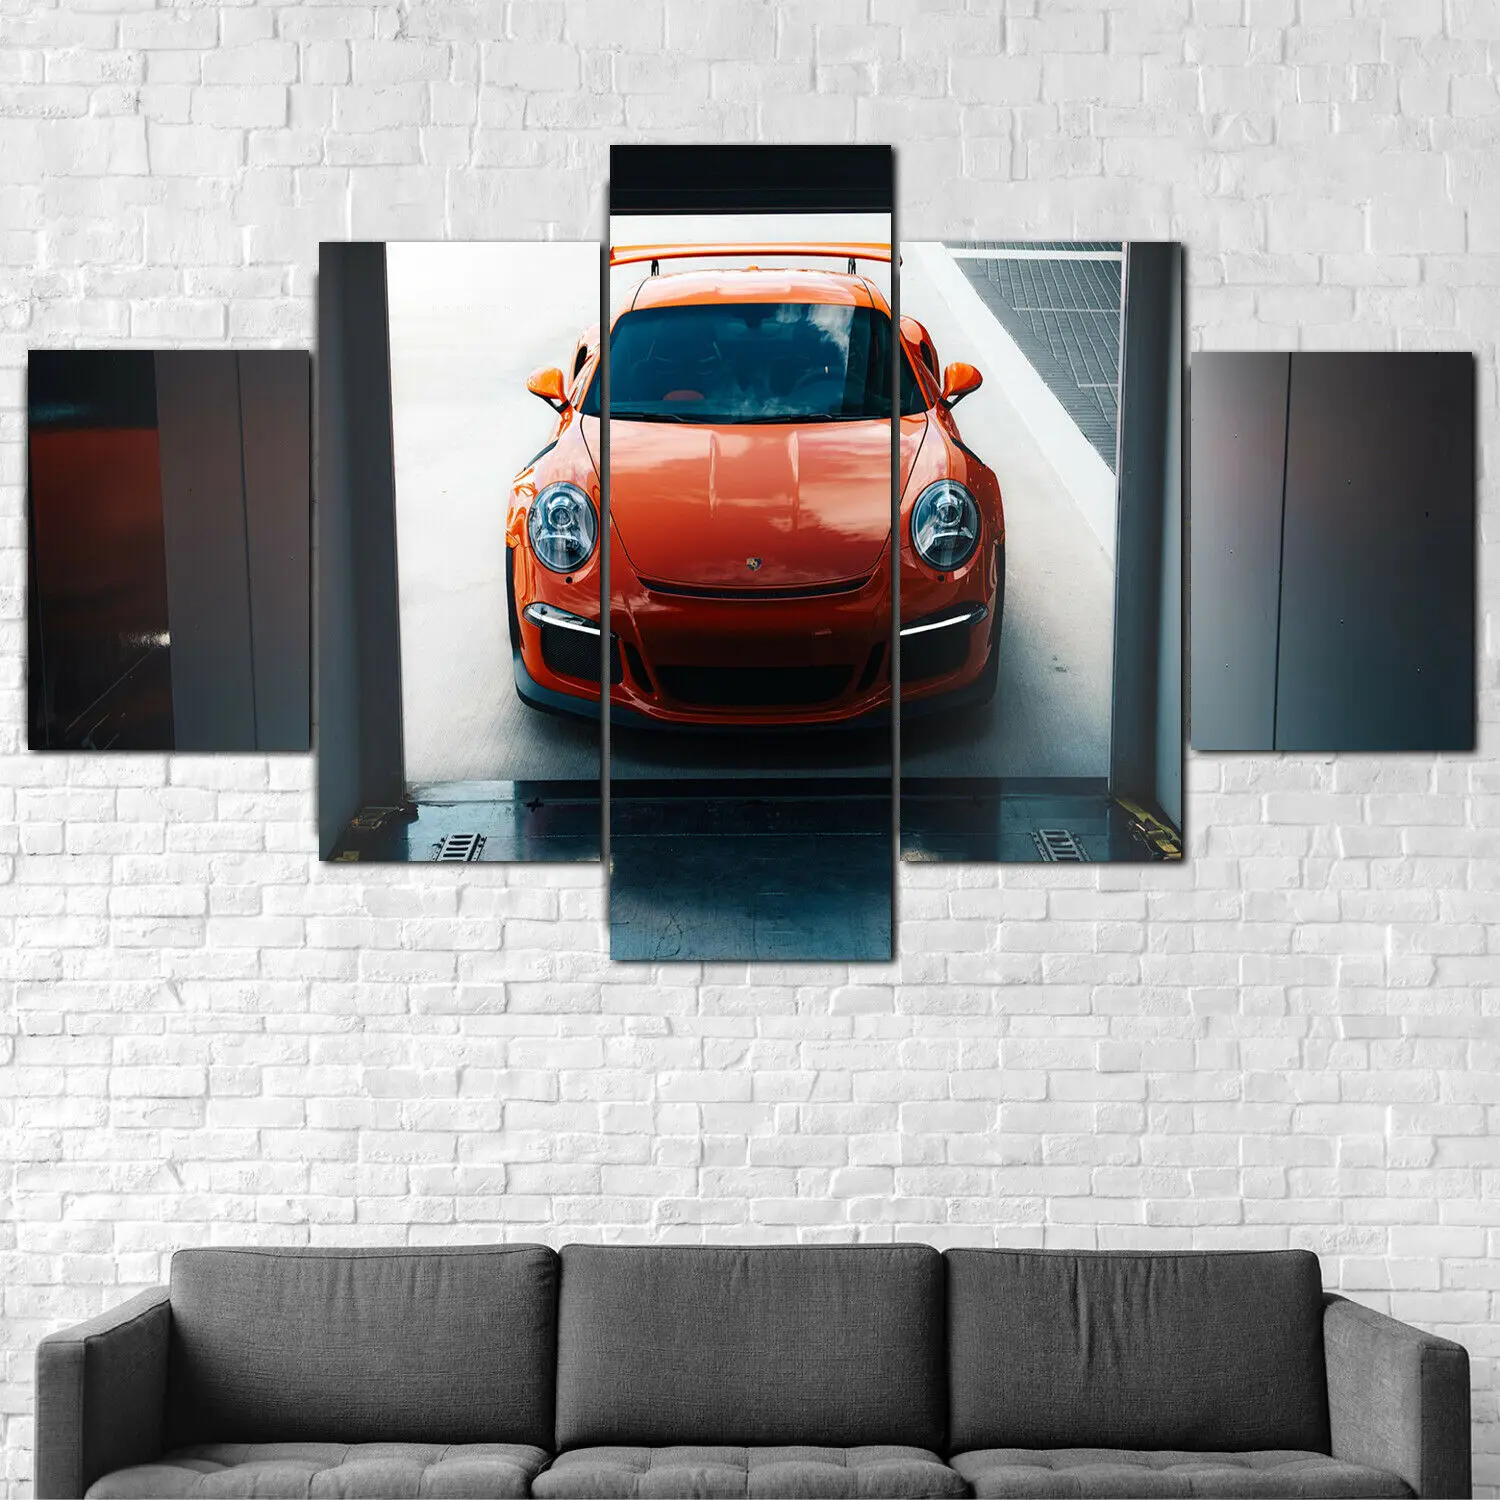 

No Framed 5Pcs Porsche 911 GT3 Garage Super Car Wall Art Canvas Posters Pictures Home Decor For Living Room Paintings Decoration